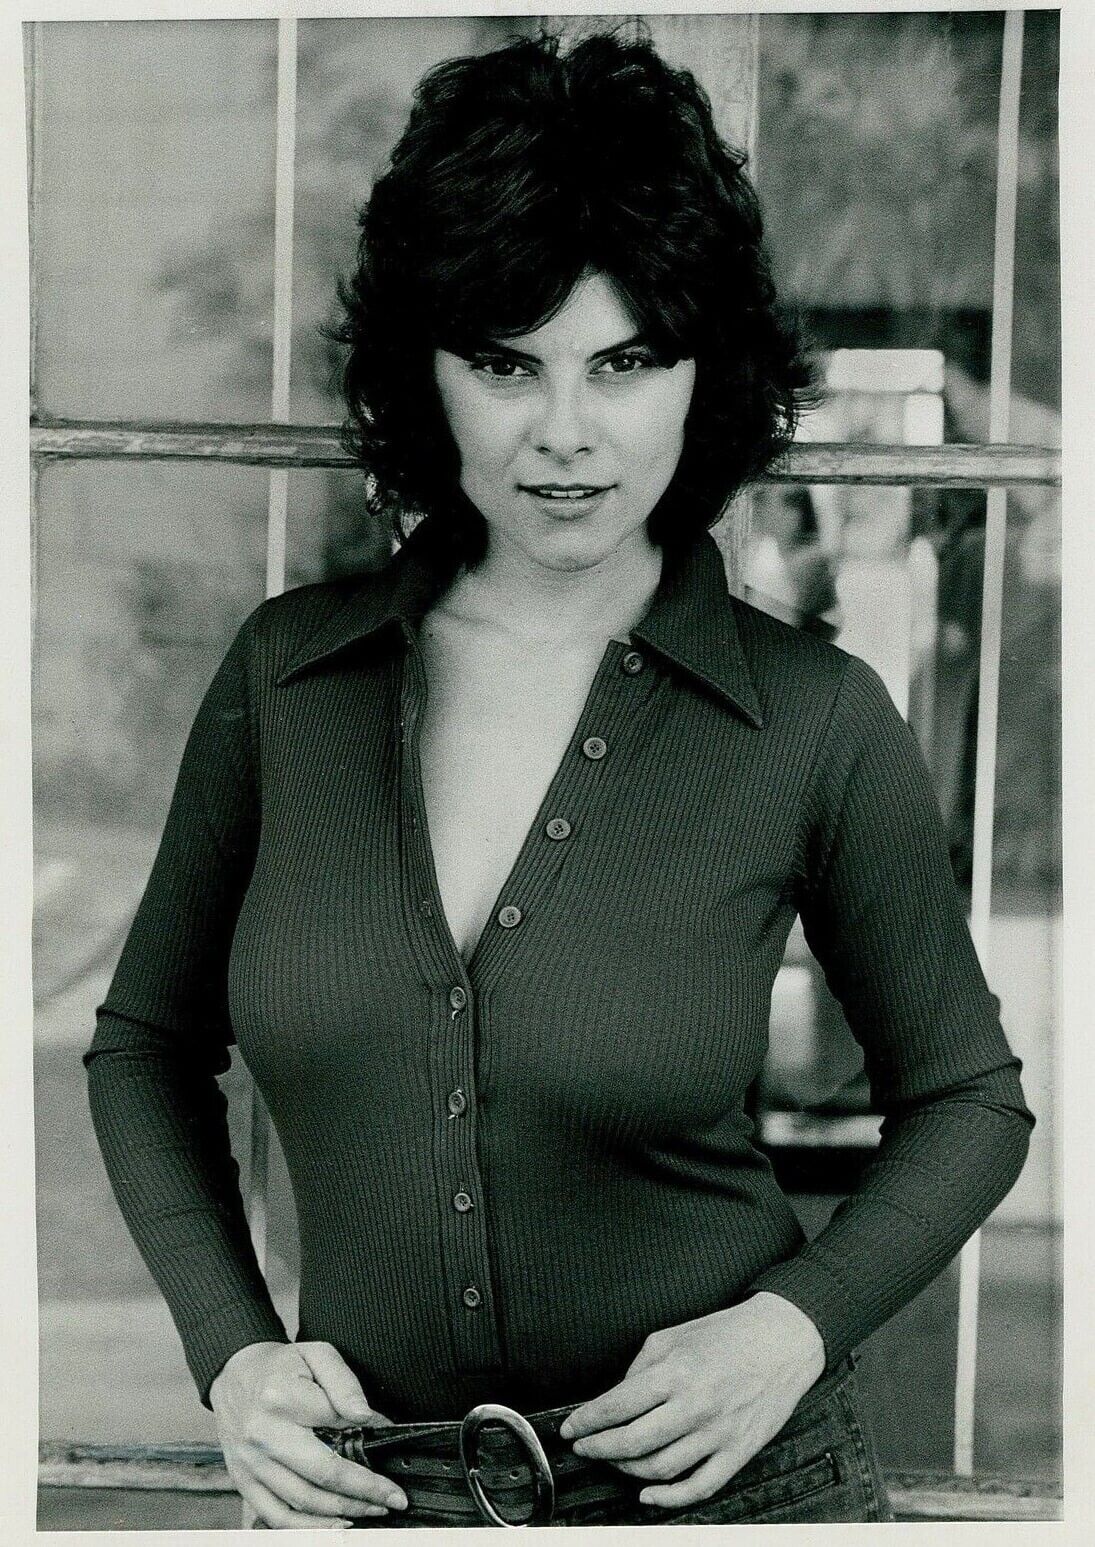 Iconic American Actress Adrienne Barbeau Picture Poster Photo Print 11x17